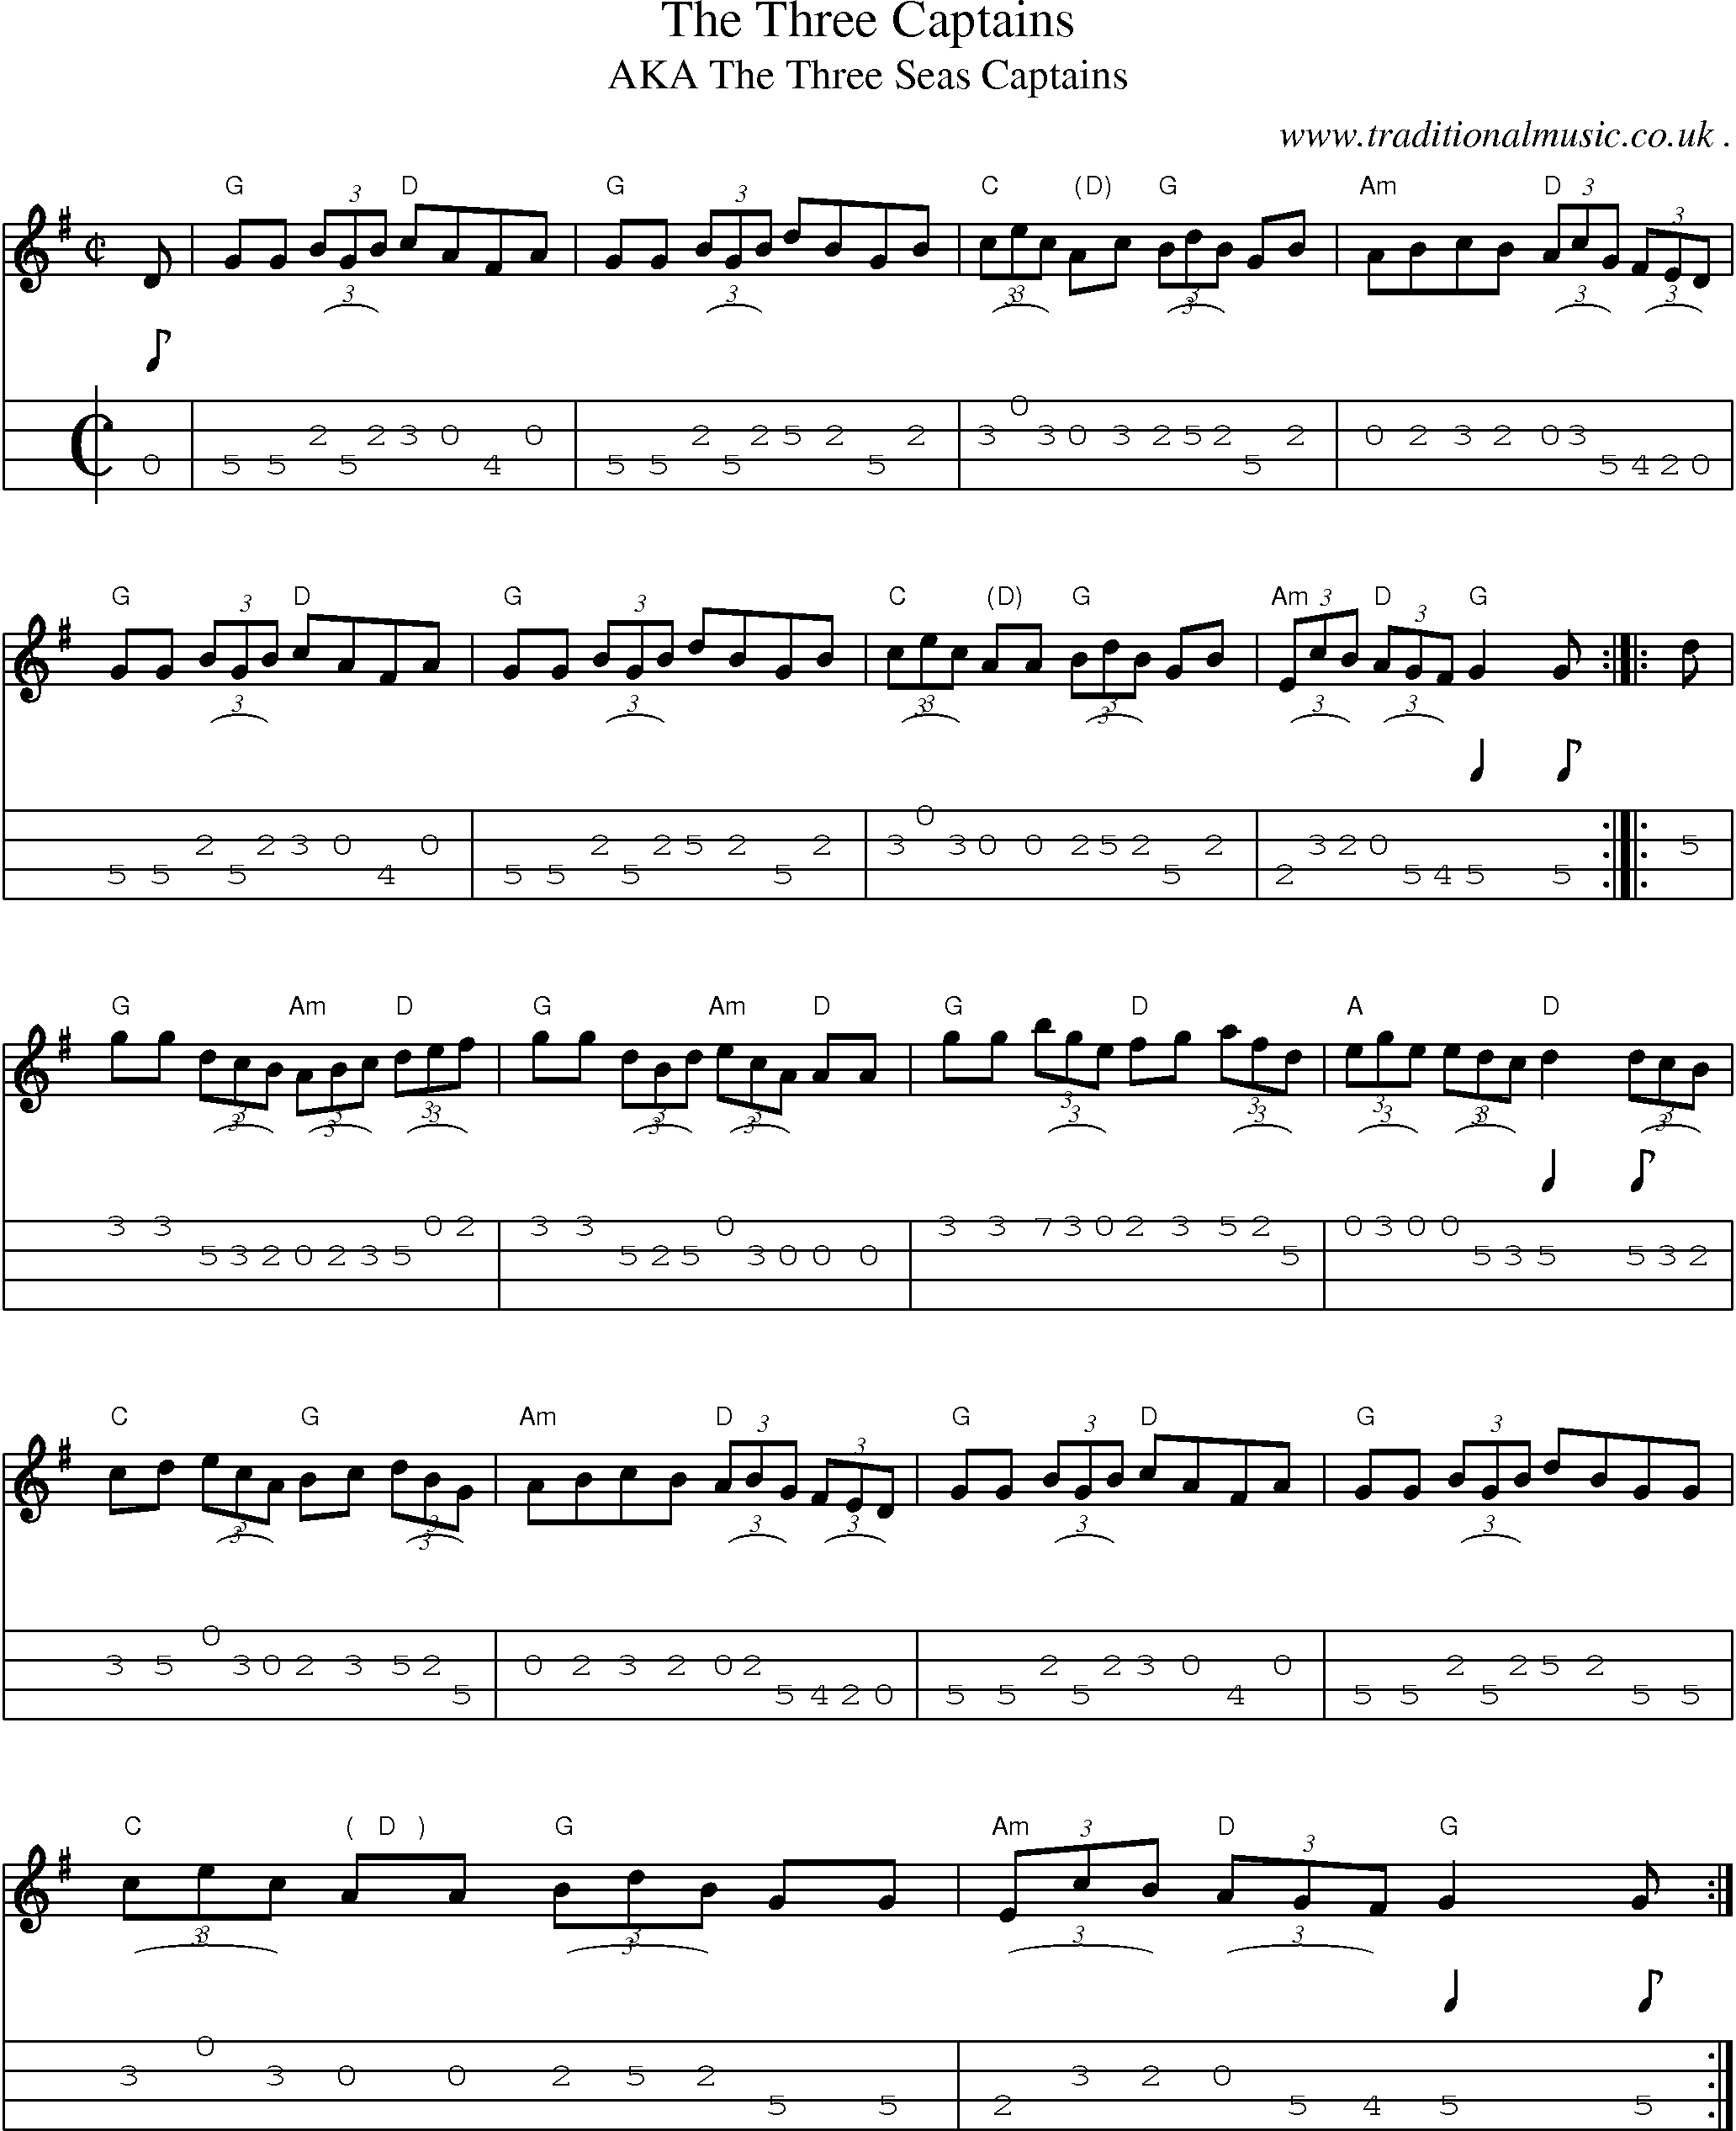 Music Score and Guitar Tabs for The Three Captains